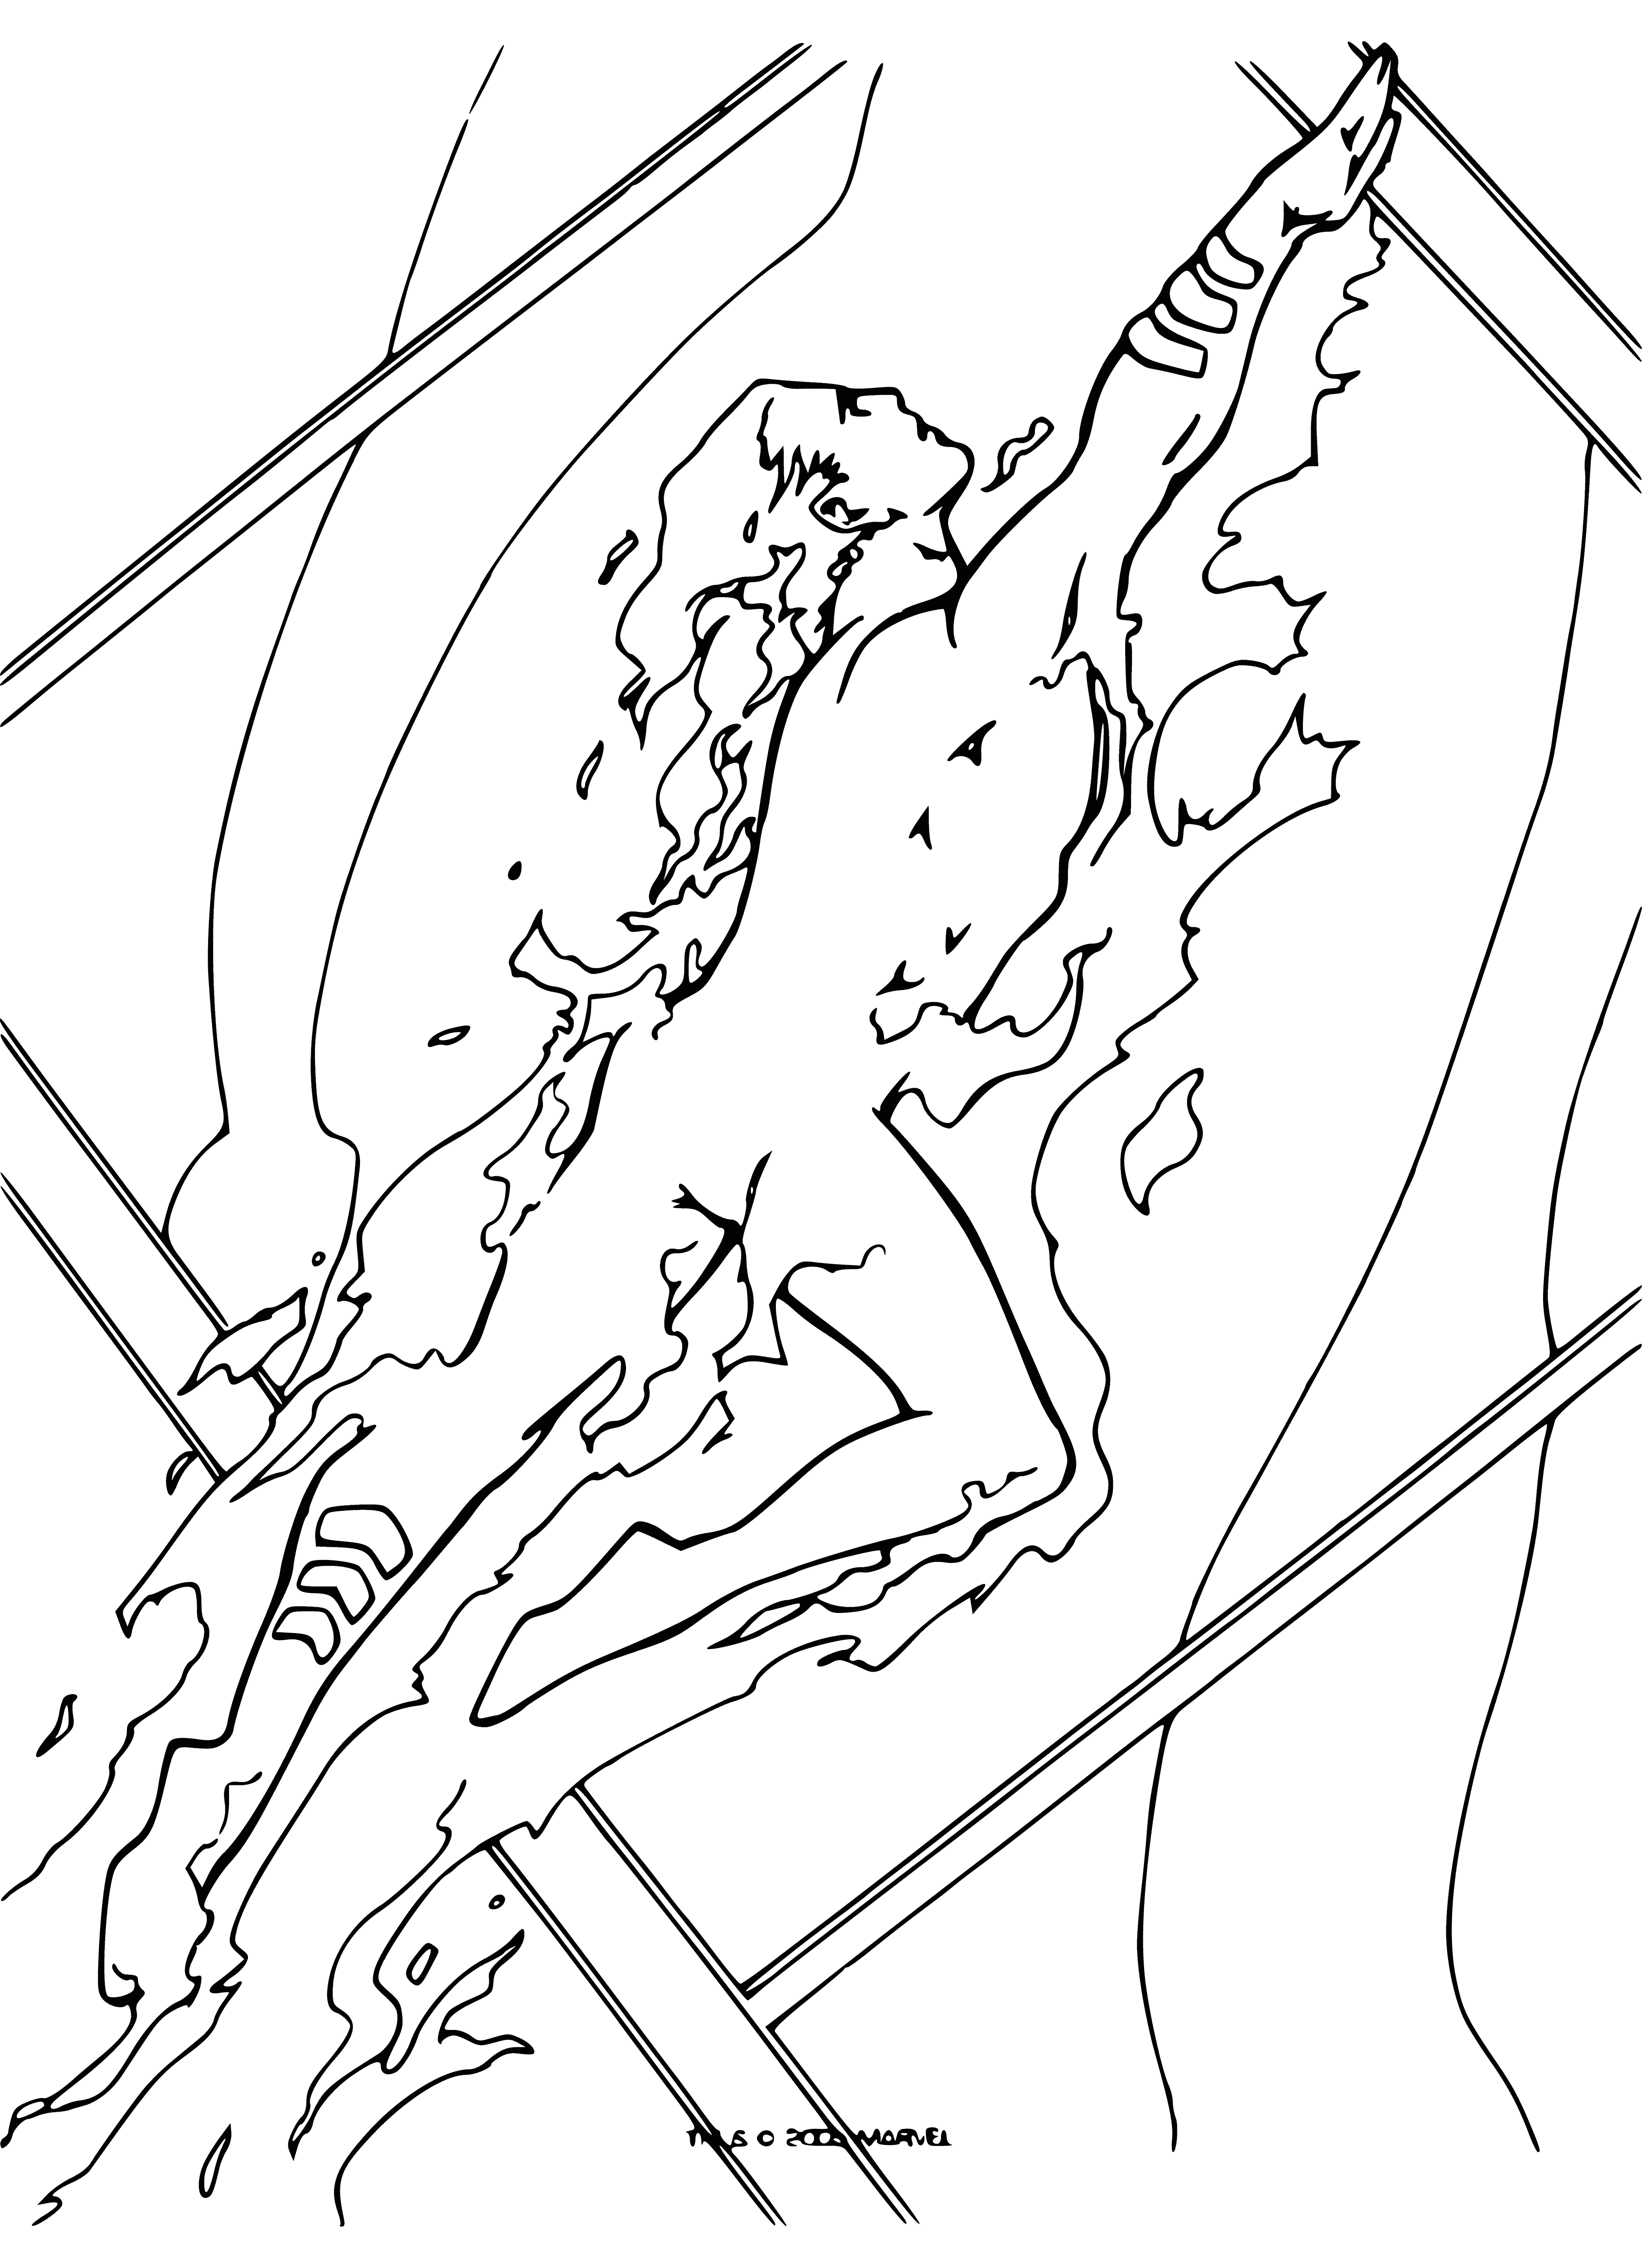 Torch coloring page